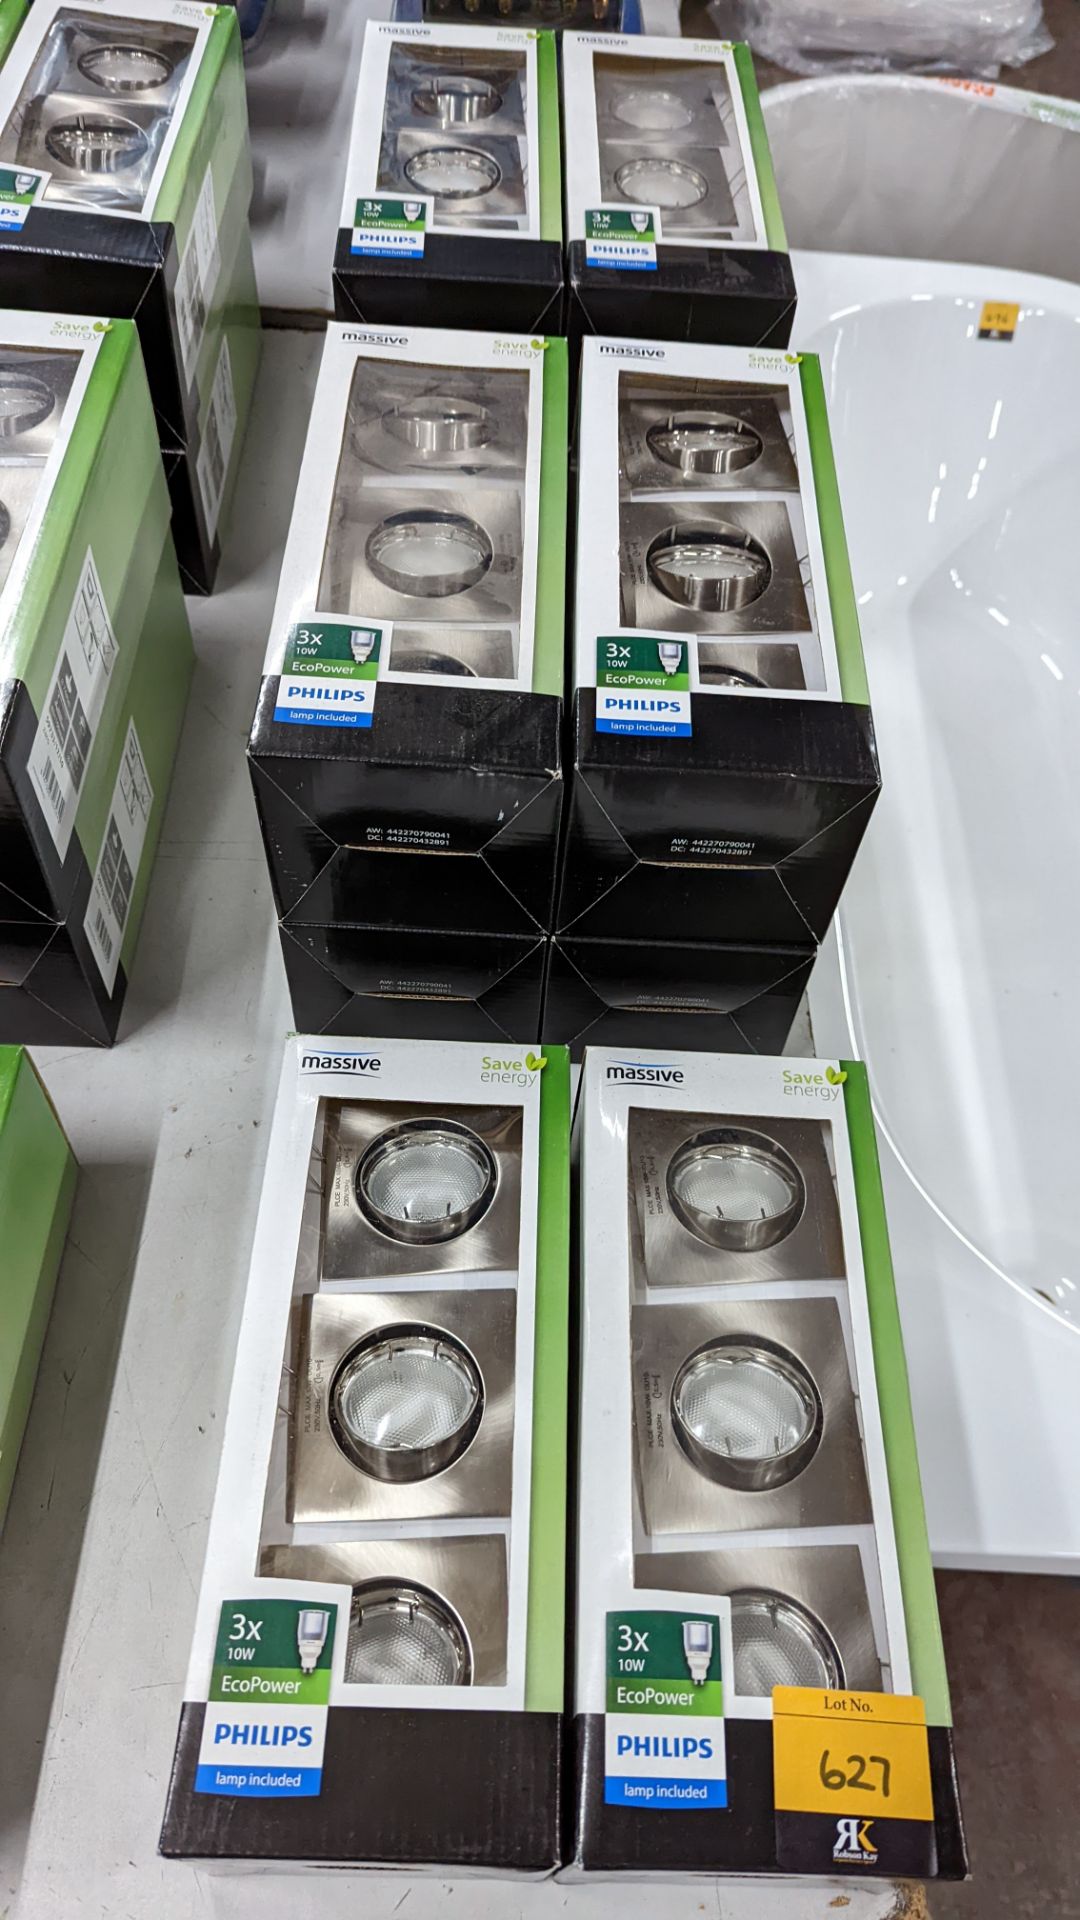 10 off Philips 3x10w Eco Power brushed chrome LED spotlights - this lot consists of 10 boxes which e